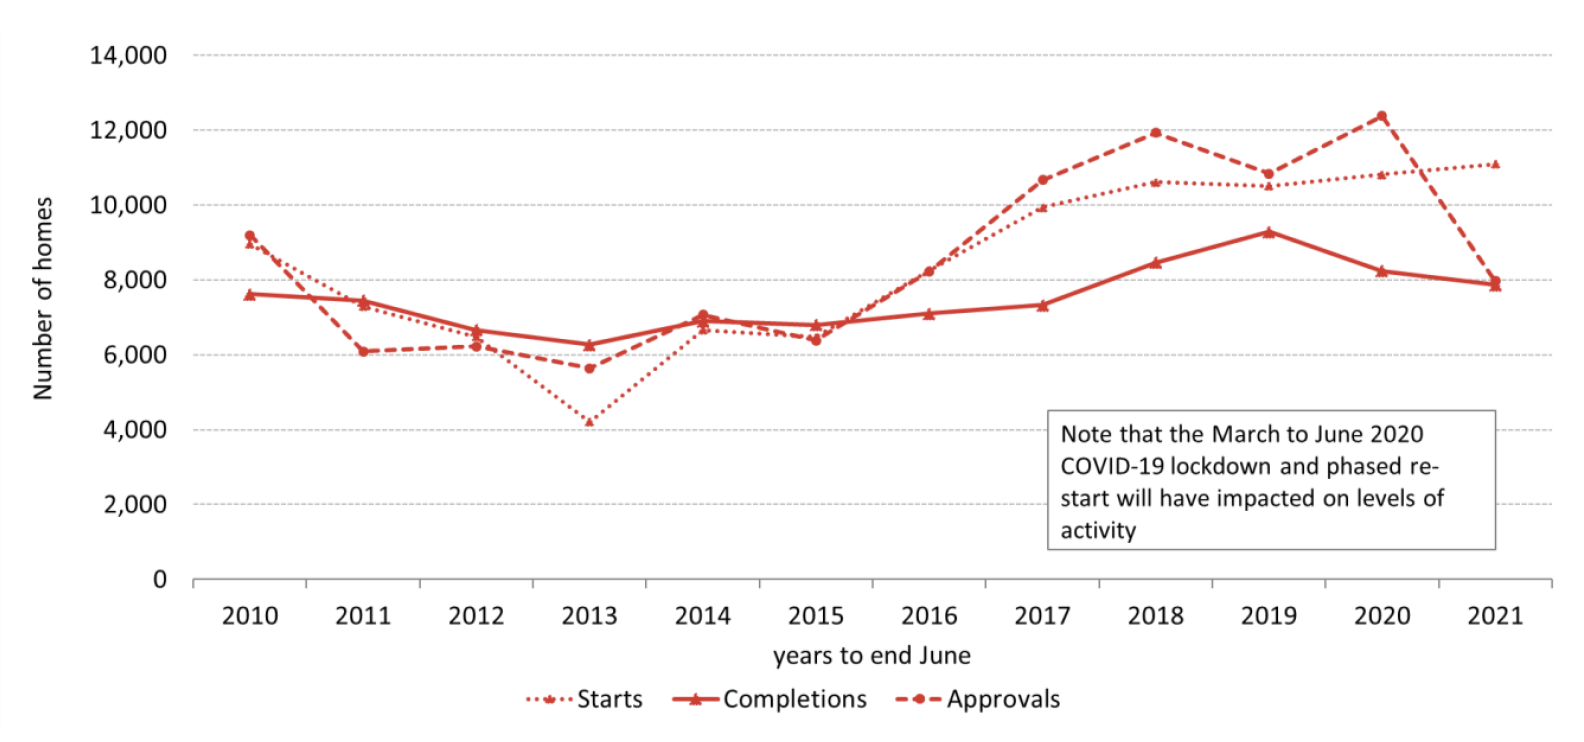 Annual Affordable Housing Supply Programme approvals and completions in the years to end June from 2010 to 2021